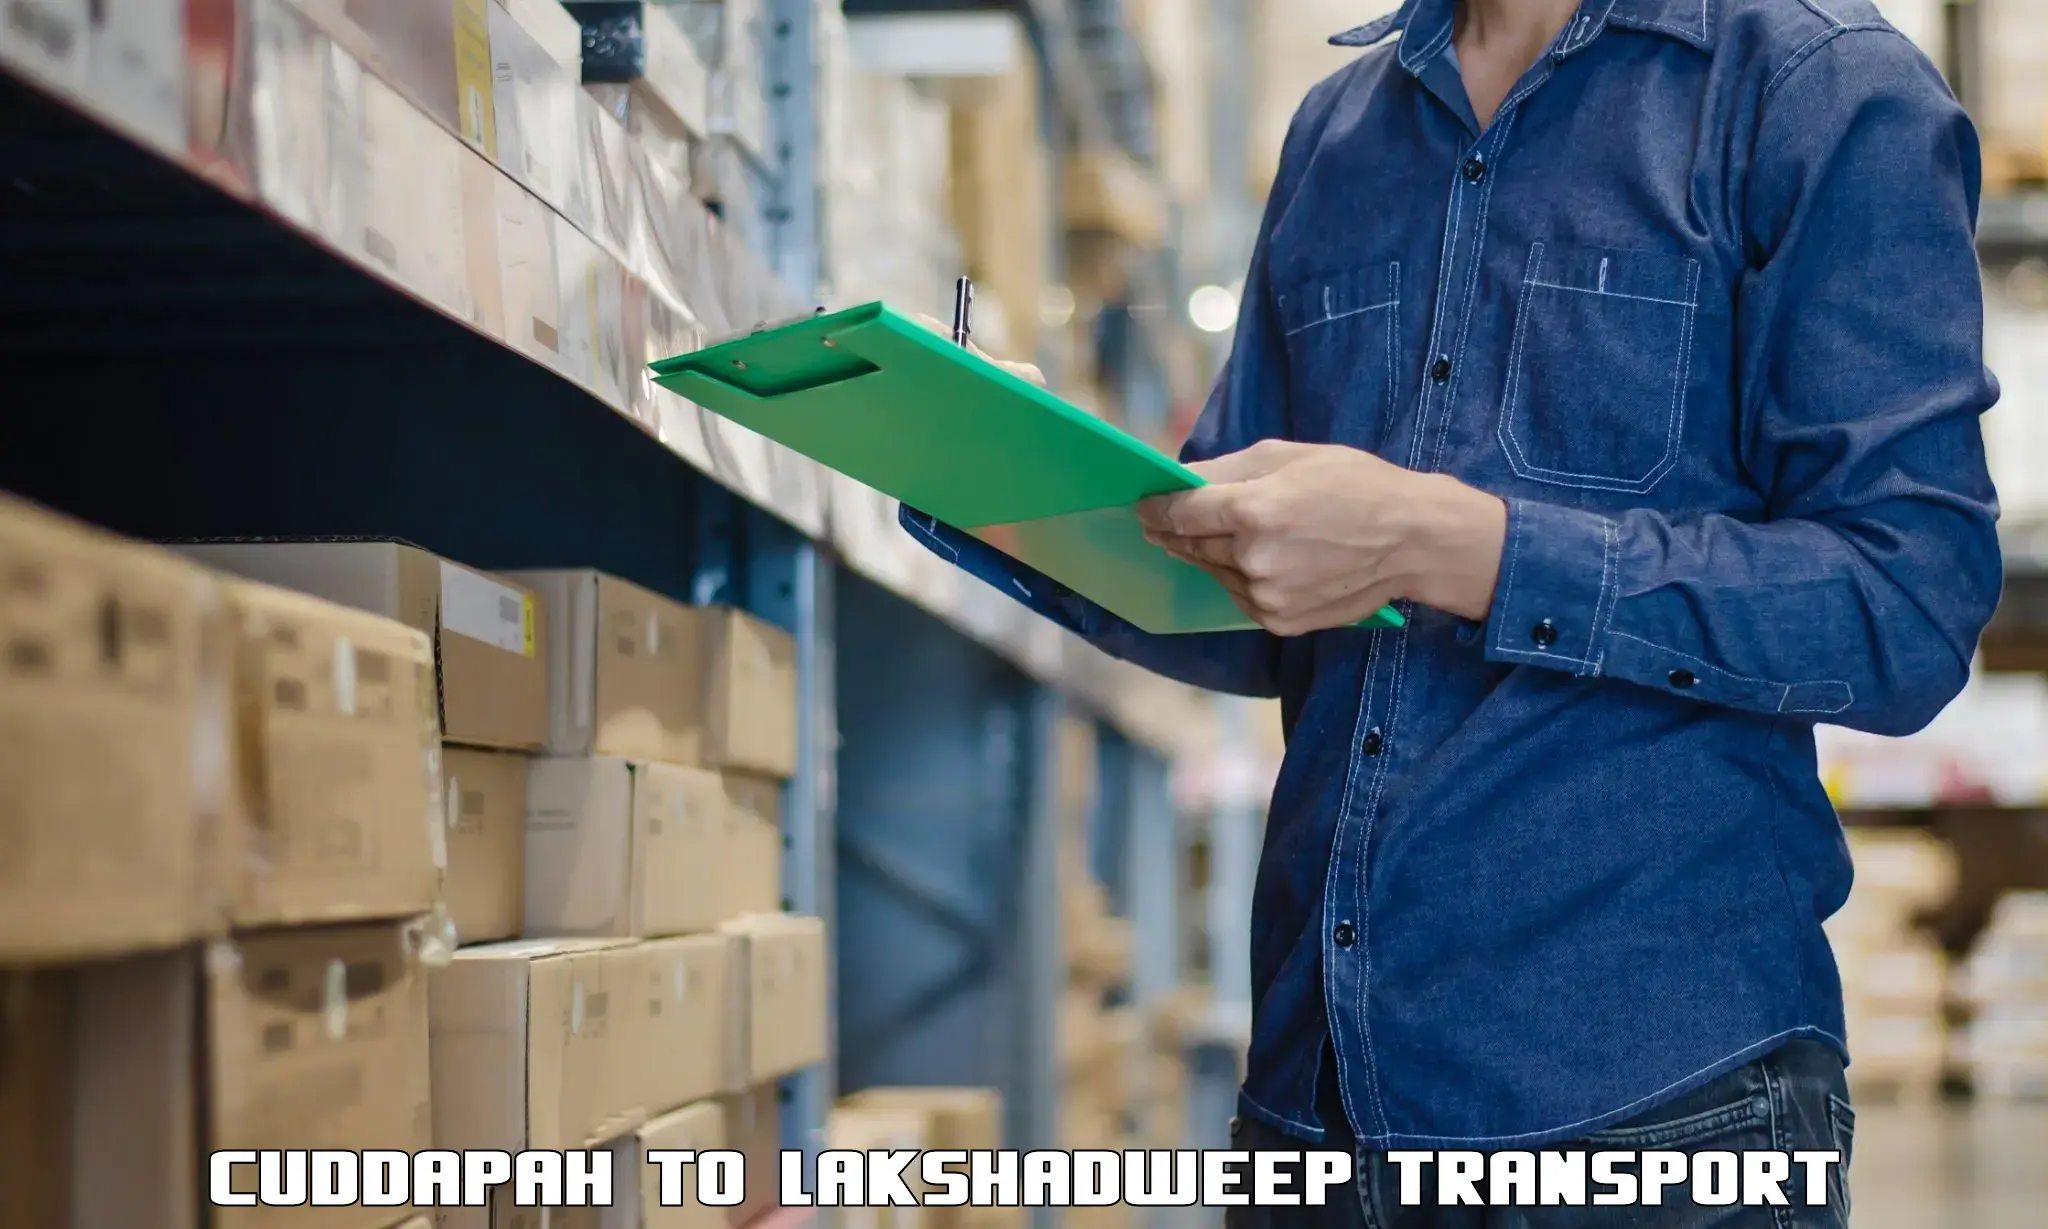 Container transport service Cuddapah to Lakshadweep